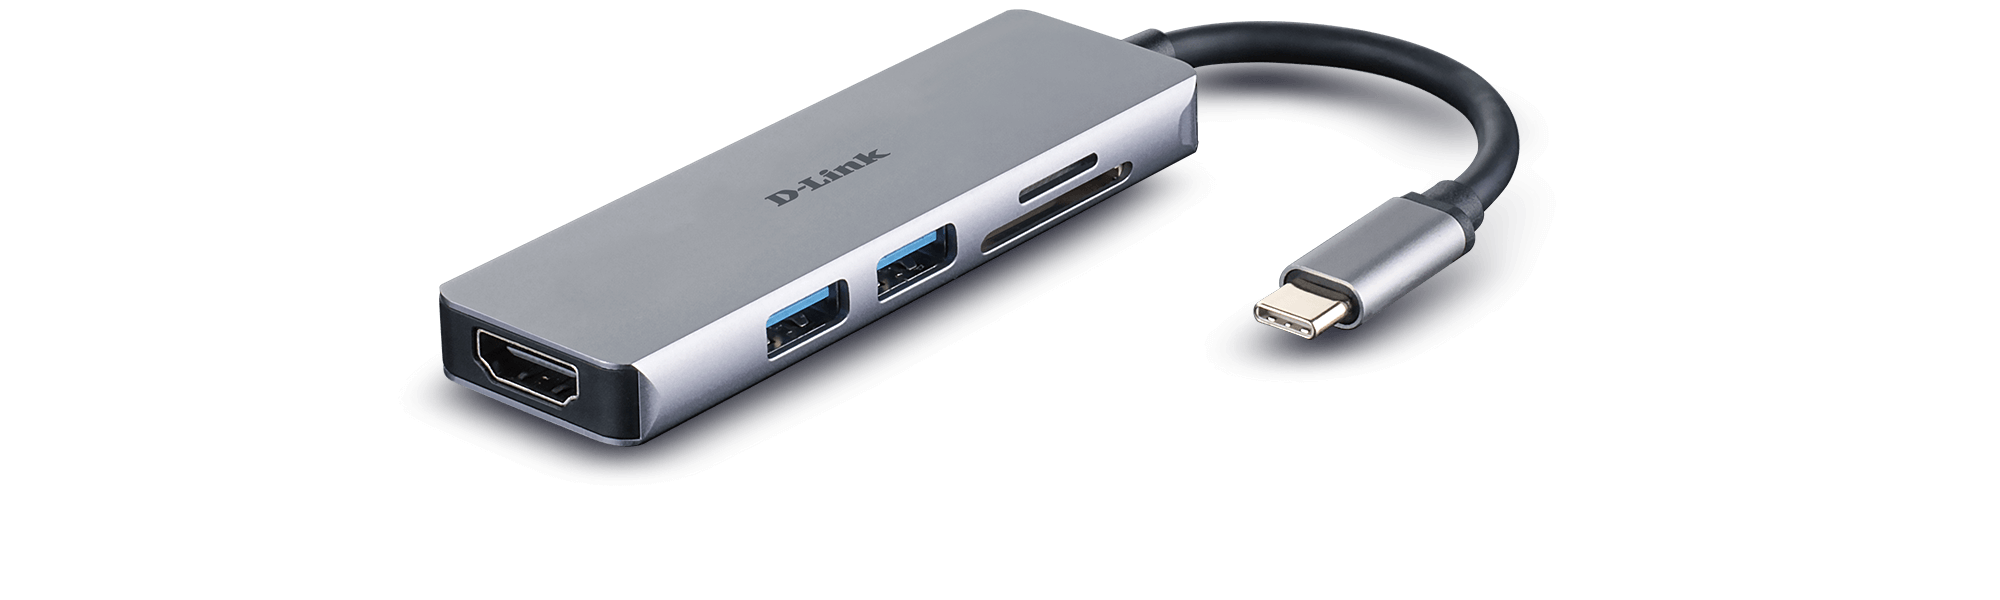 DUB-M530 5-in-1 USB-C Hub with HDMI/Card Reader - overview